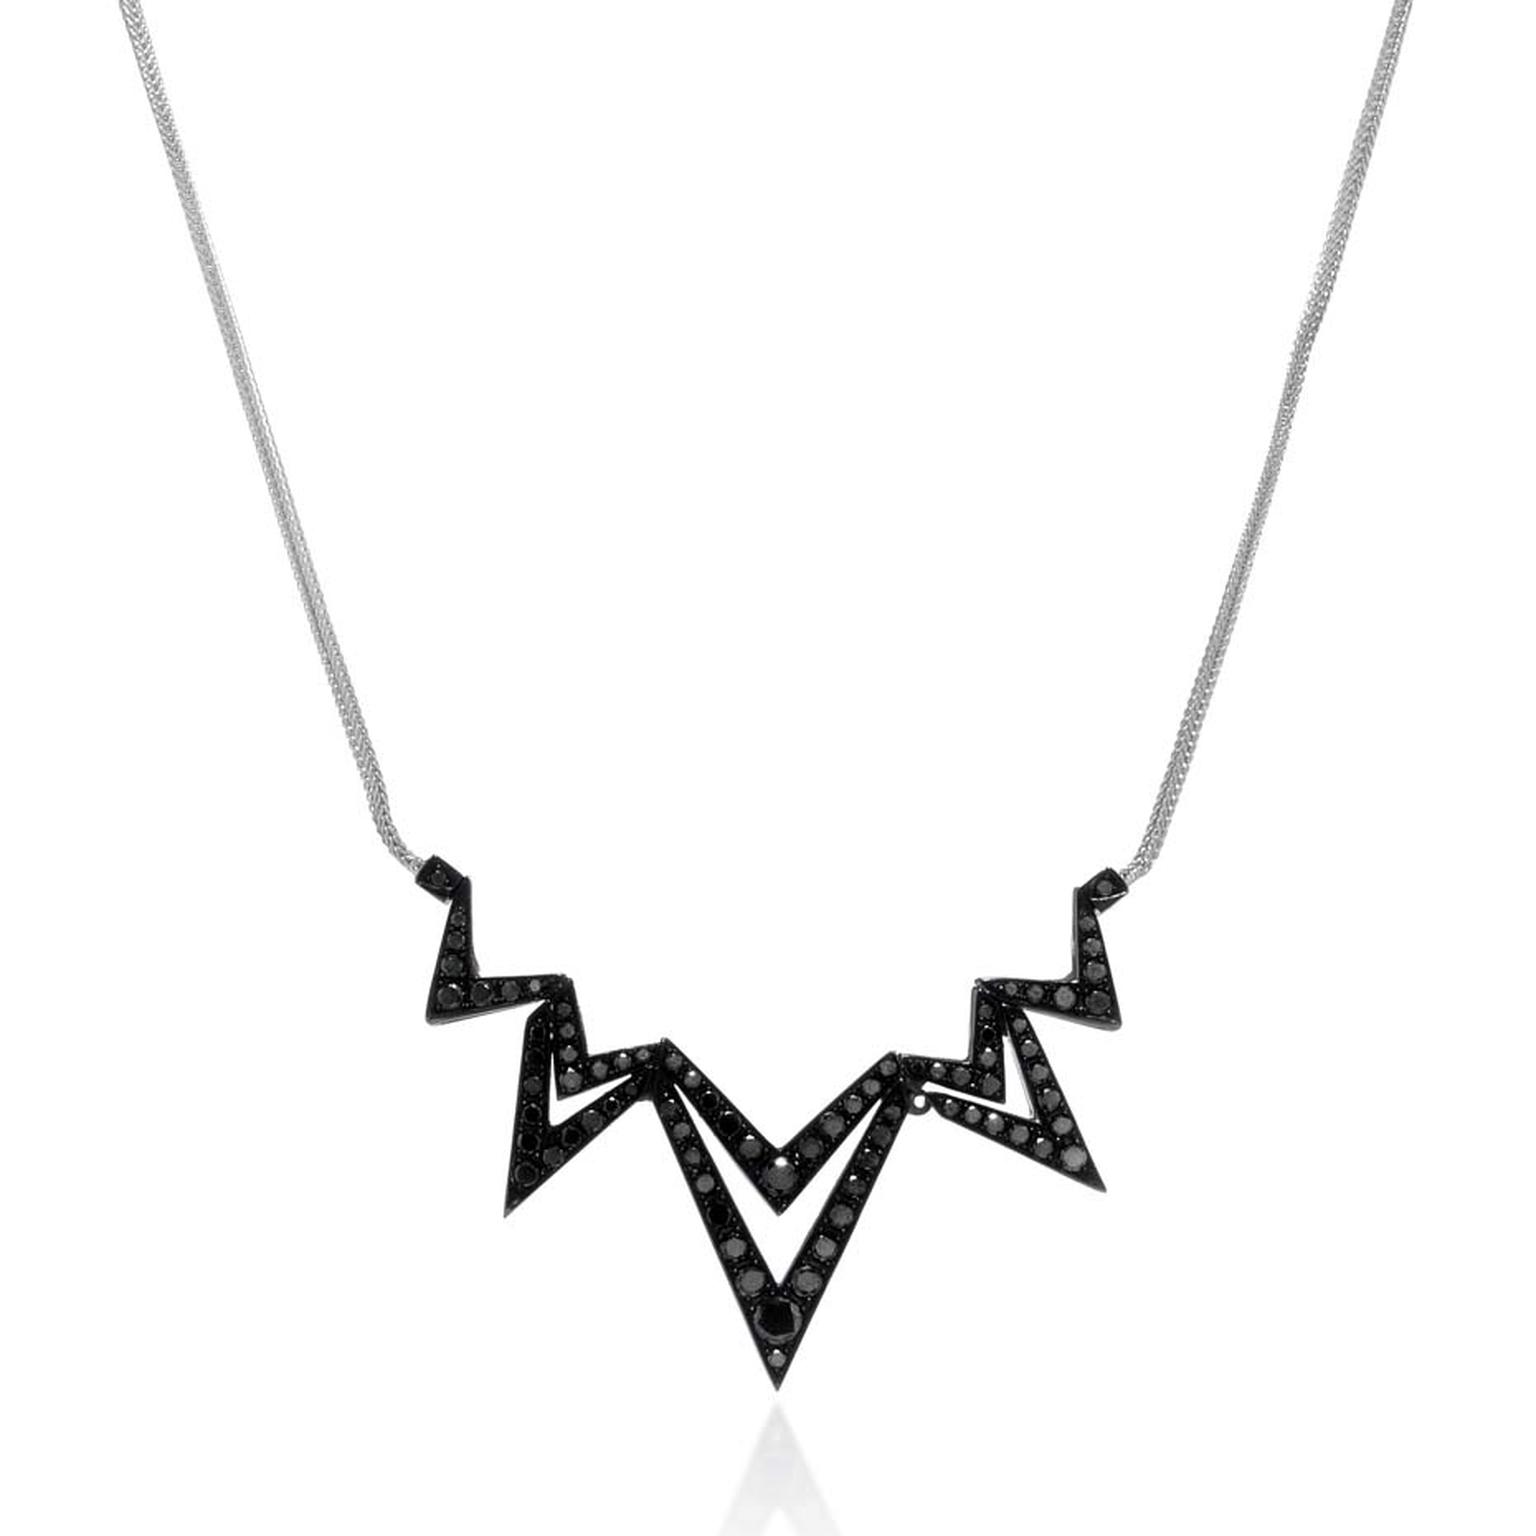 Stephen Webster Lady Stardust necklace with black diamonds (£4,300).